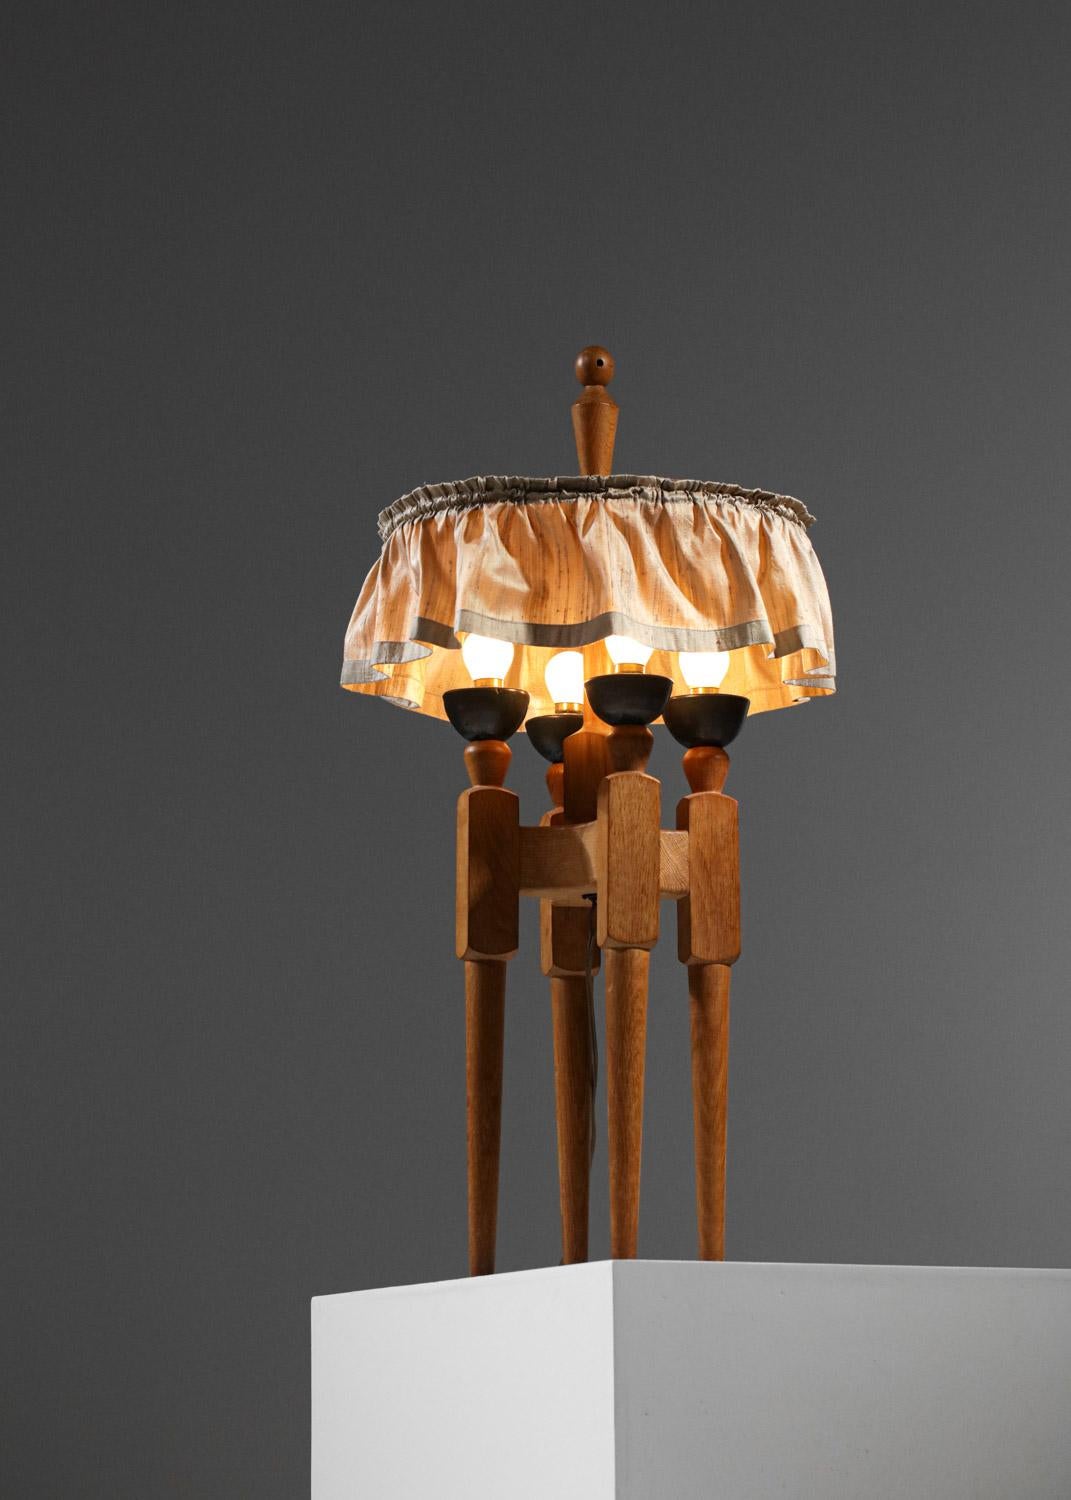 French french Table lamp in solid oak and ceramic Guillerme & Chambron 50's - G044 For Sale